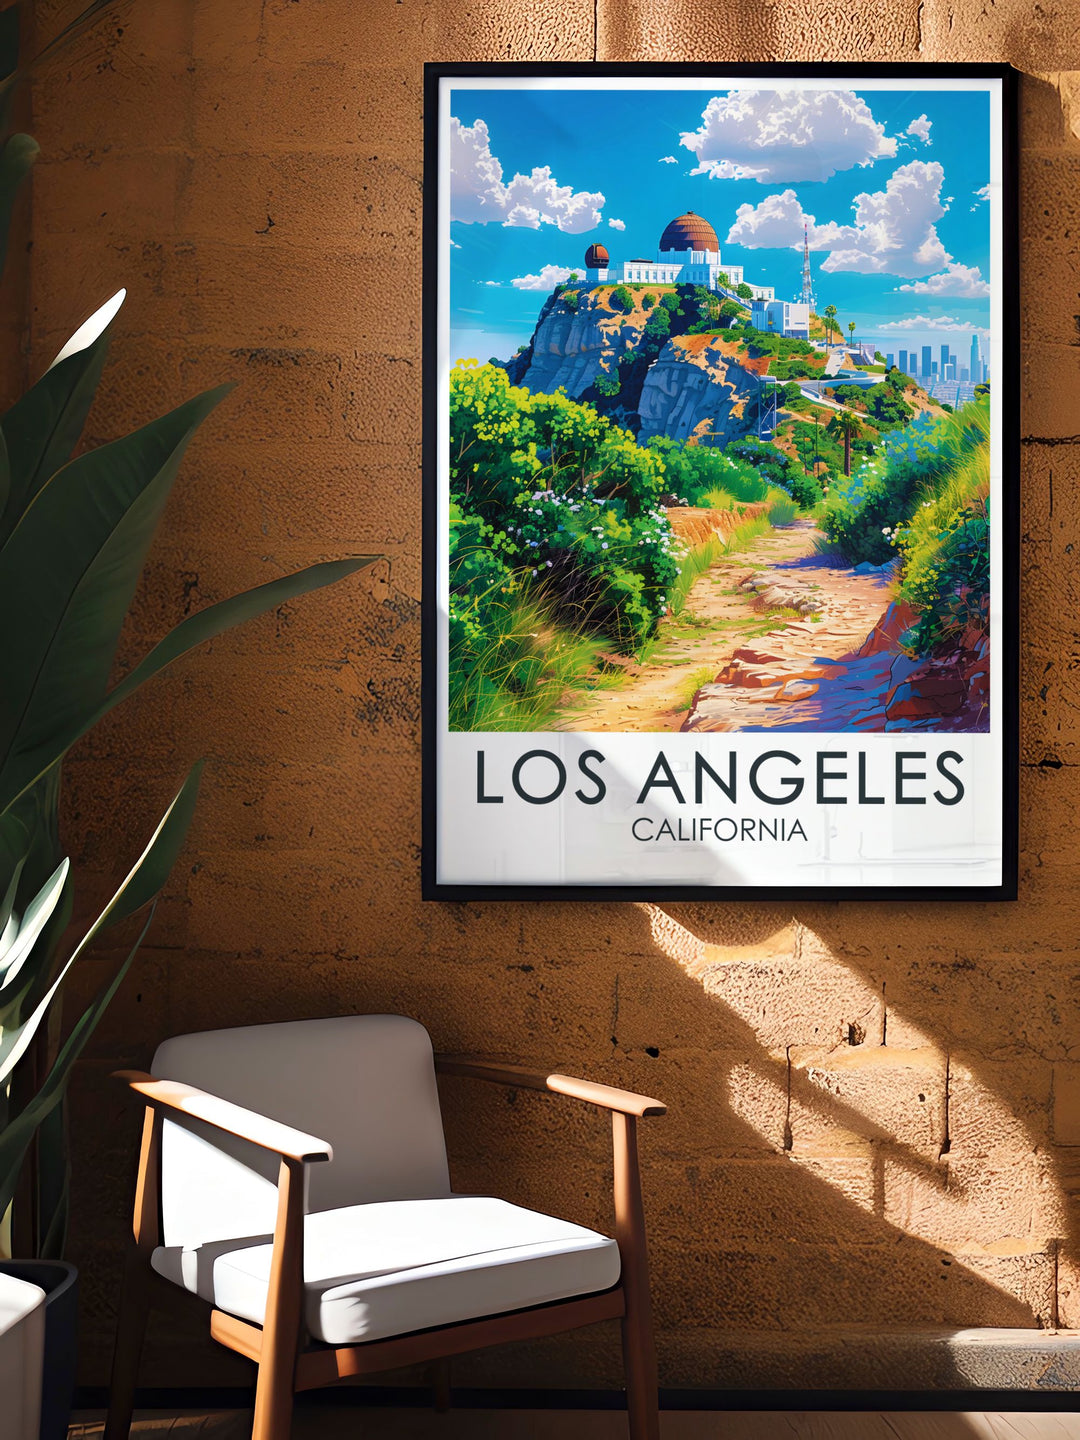 Sophisticated Griffith Observatory artwork capturing the timeless allure of Los Angeles ideal for those who appreciate fine art and the mysteries of the cosmos a perfect piece for your collection of Los Angeles art and California wall art